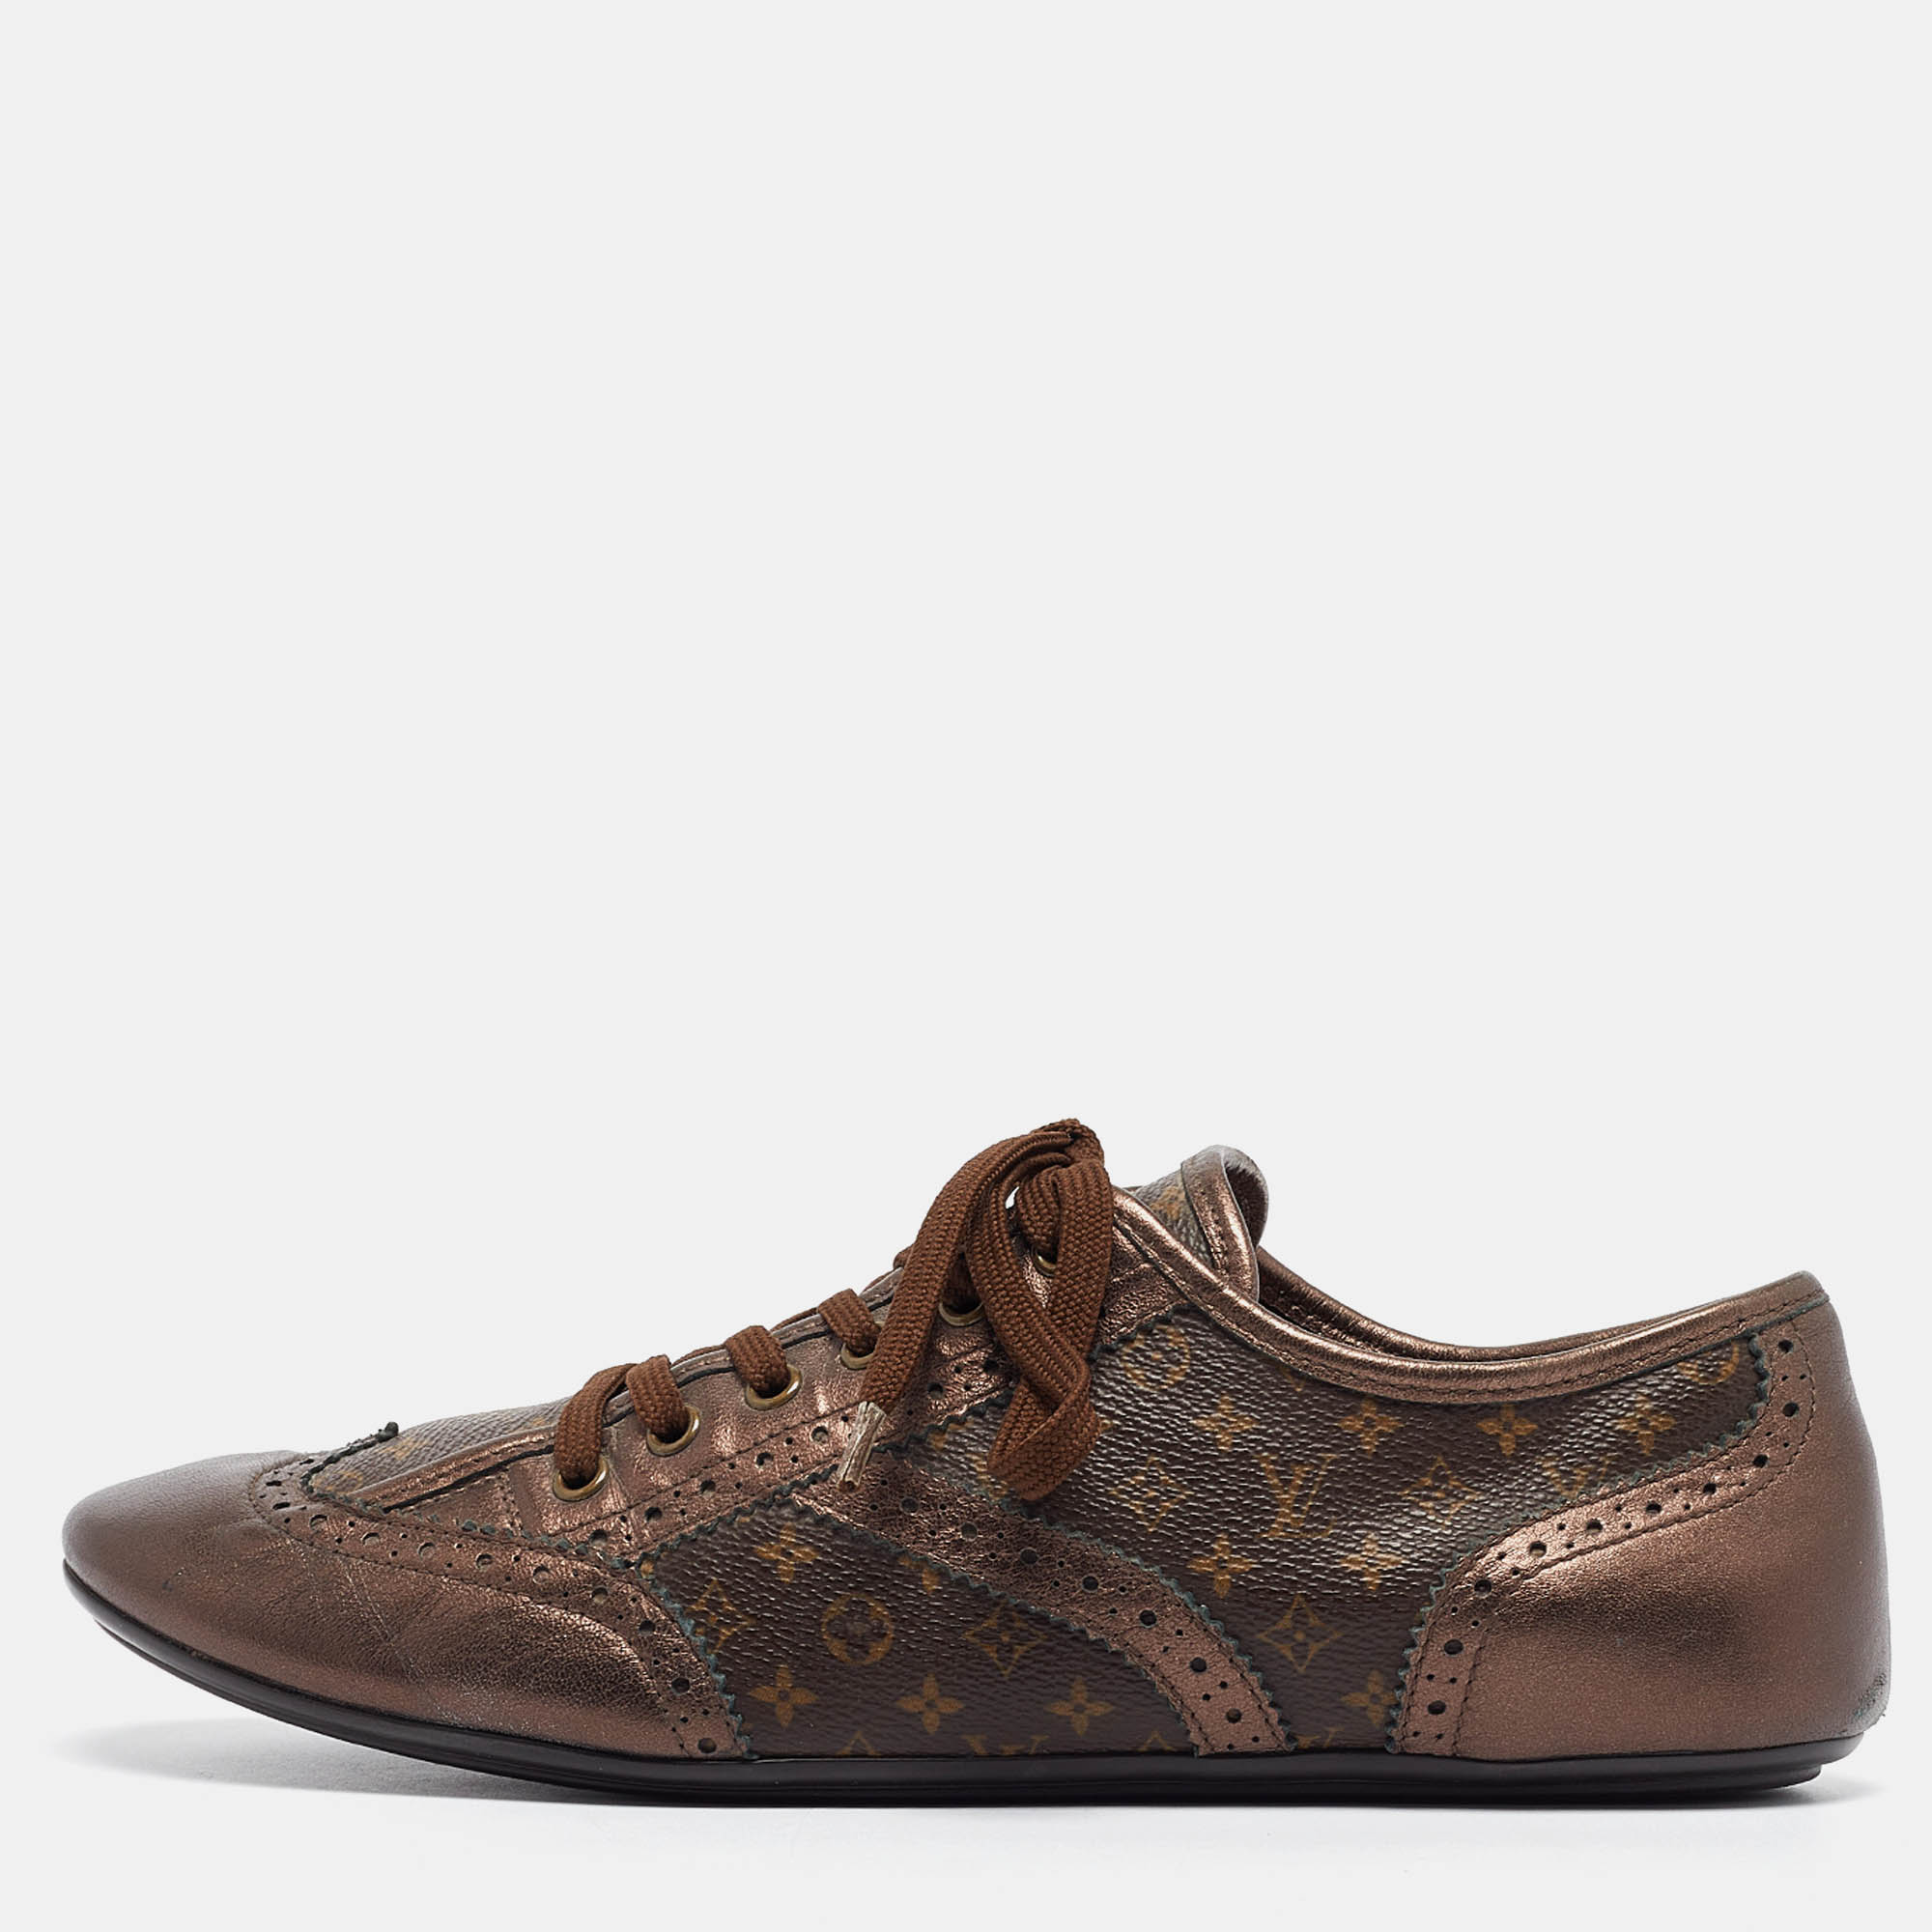 Louis vuitton metallic bronze monogram leather and canvas lace up sneakers size 39